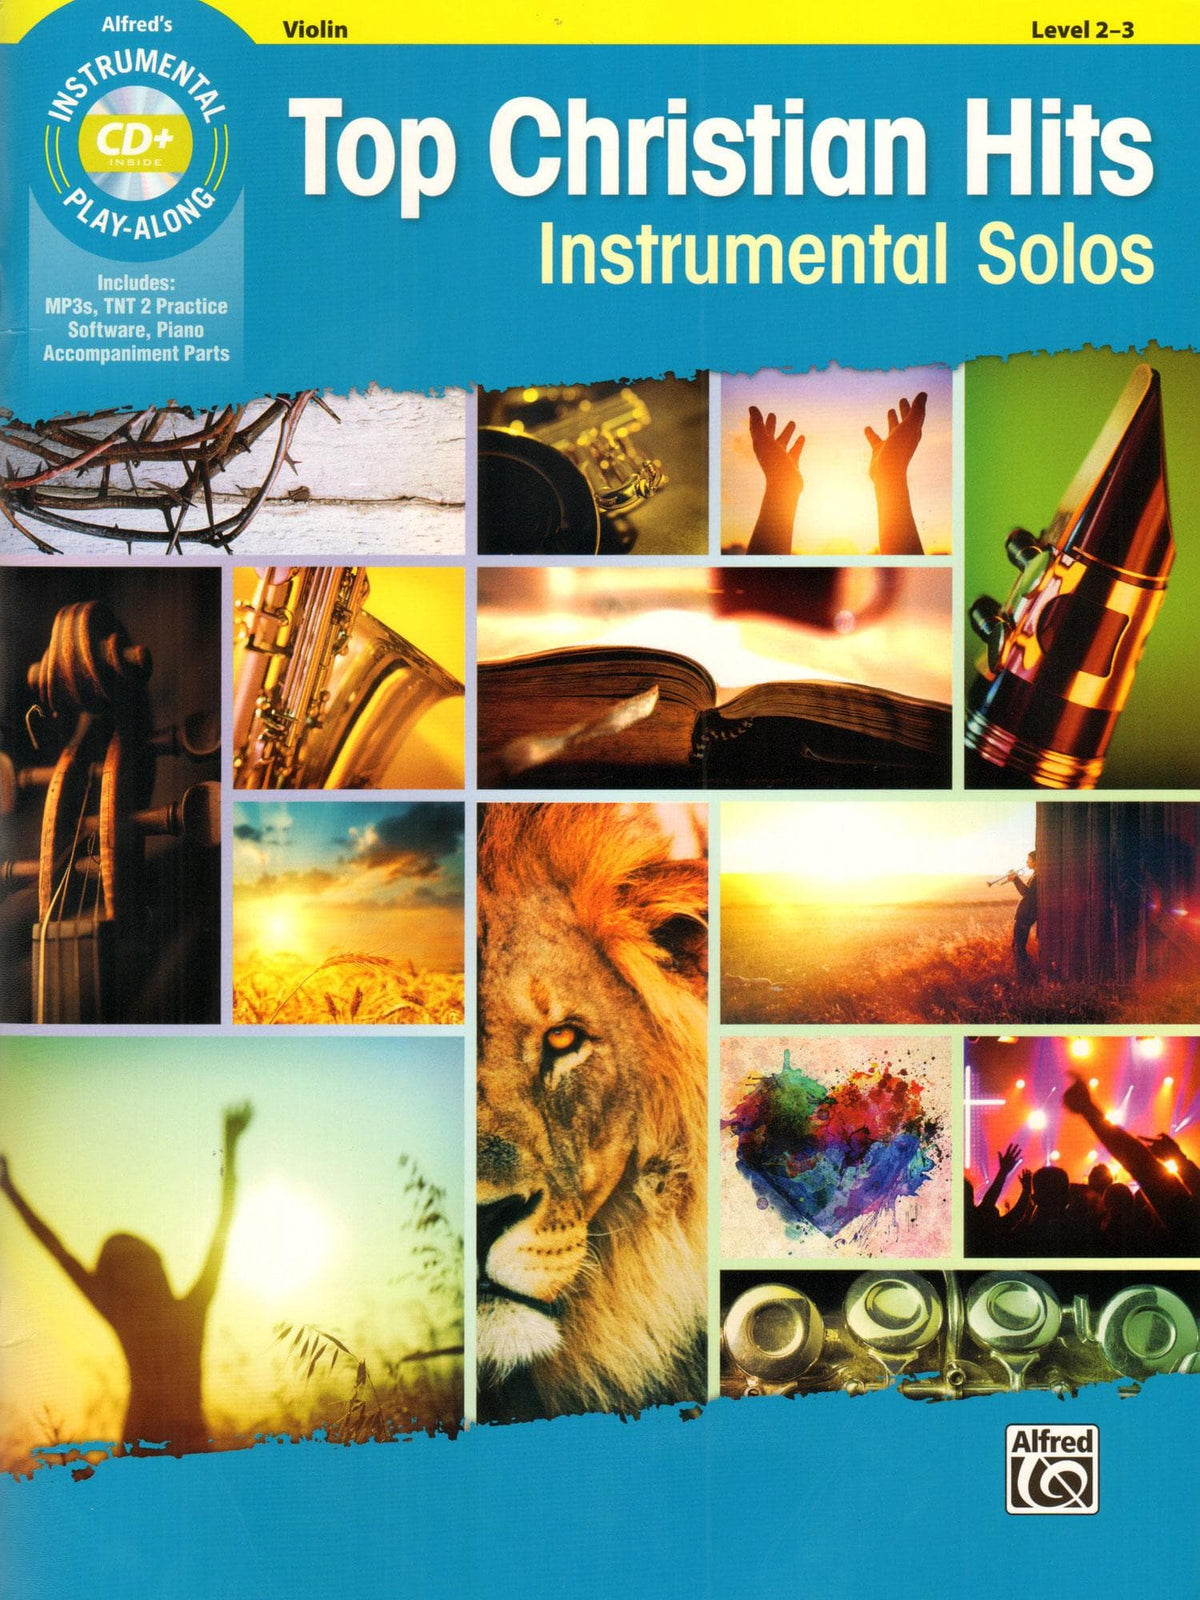 Top Christian Hits: Instrumental Solos - Violin Solo w/Accompaniment - Alfred Publishing Co.